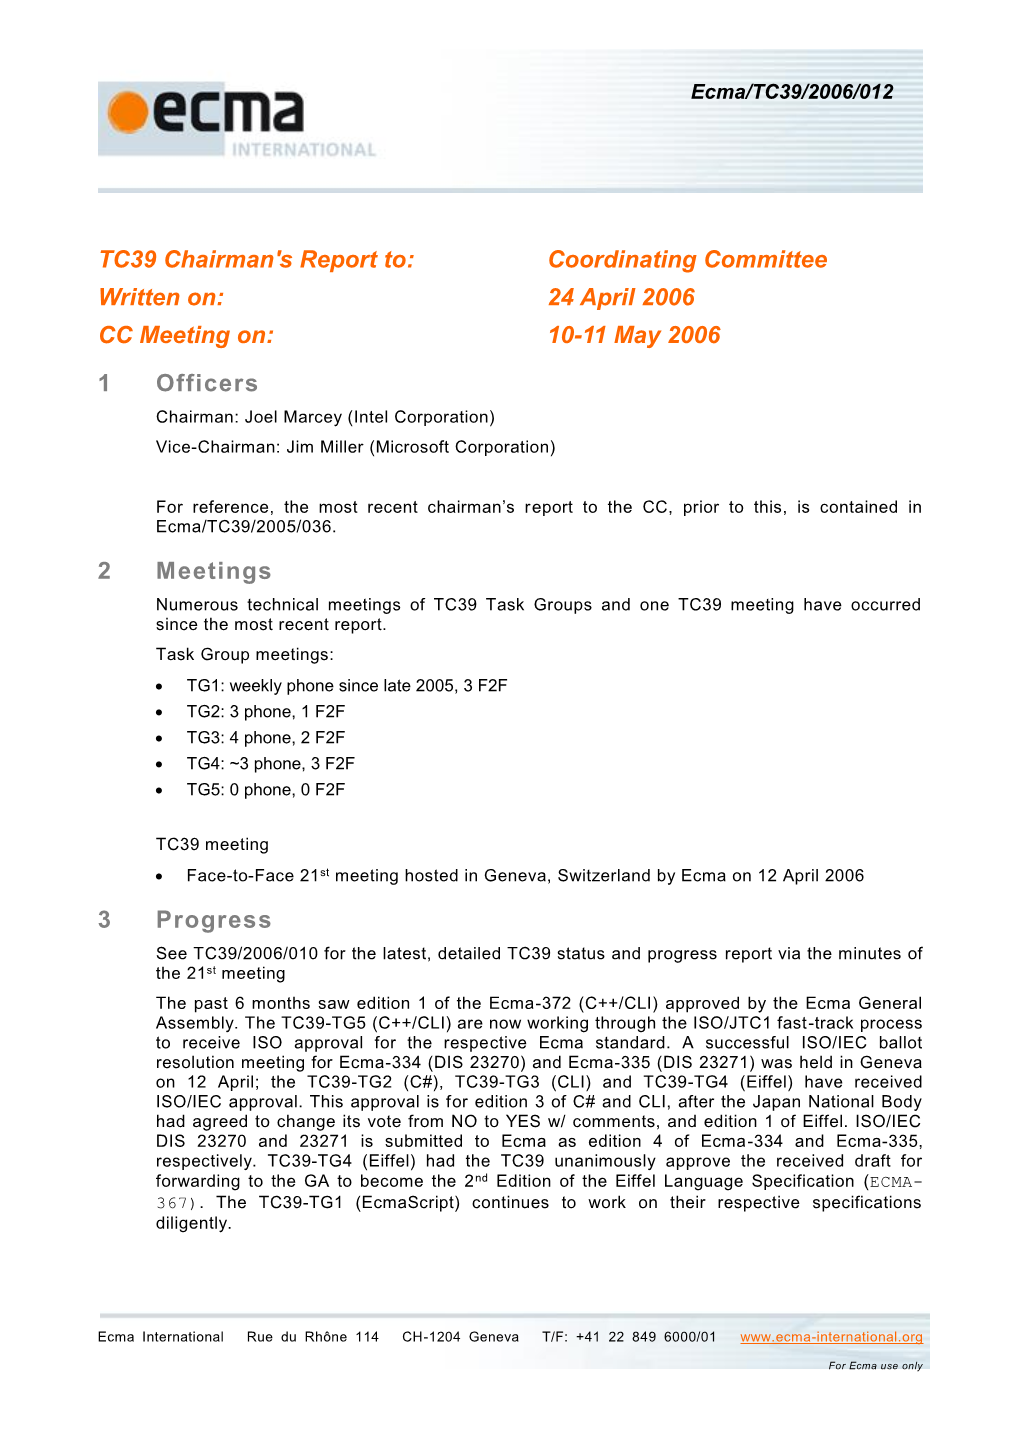 TC39 Chairman's Report to the CC, April 2006